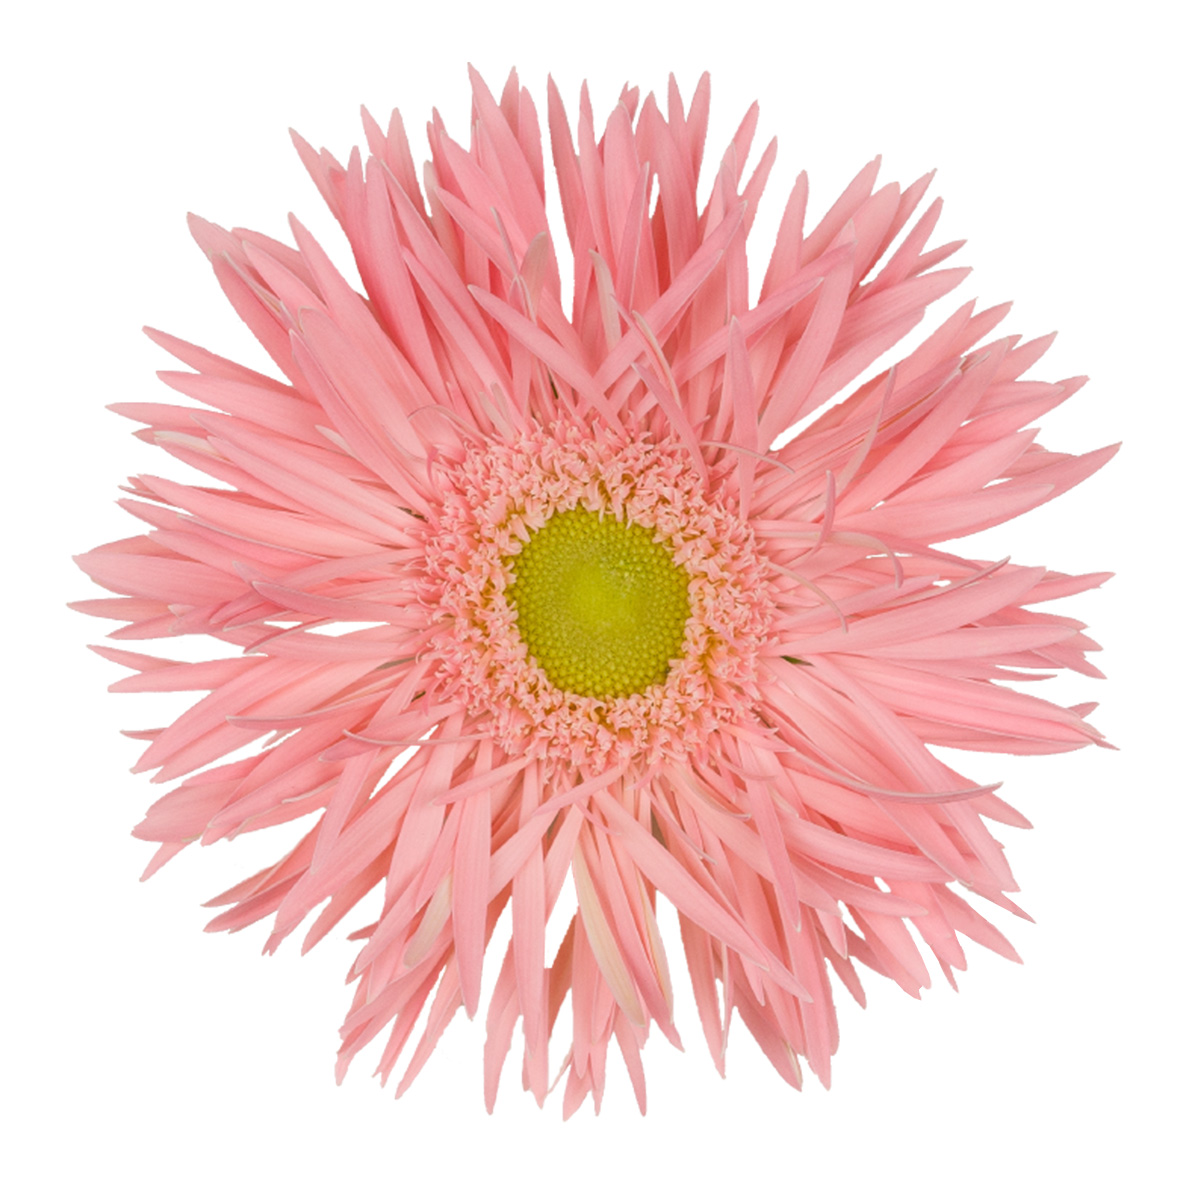 20 Flowers That Fit Into Your Genuine Pink Color Palette - Gerspider Emotion 1